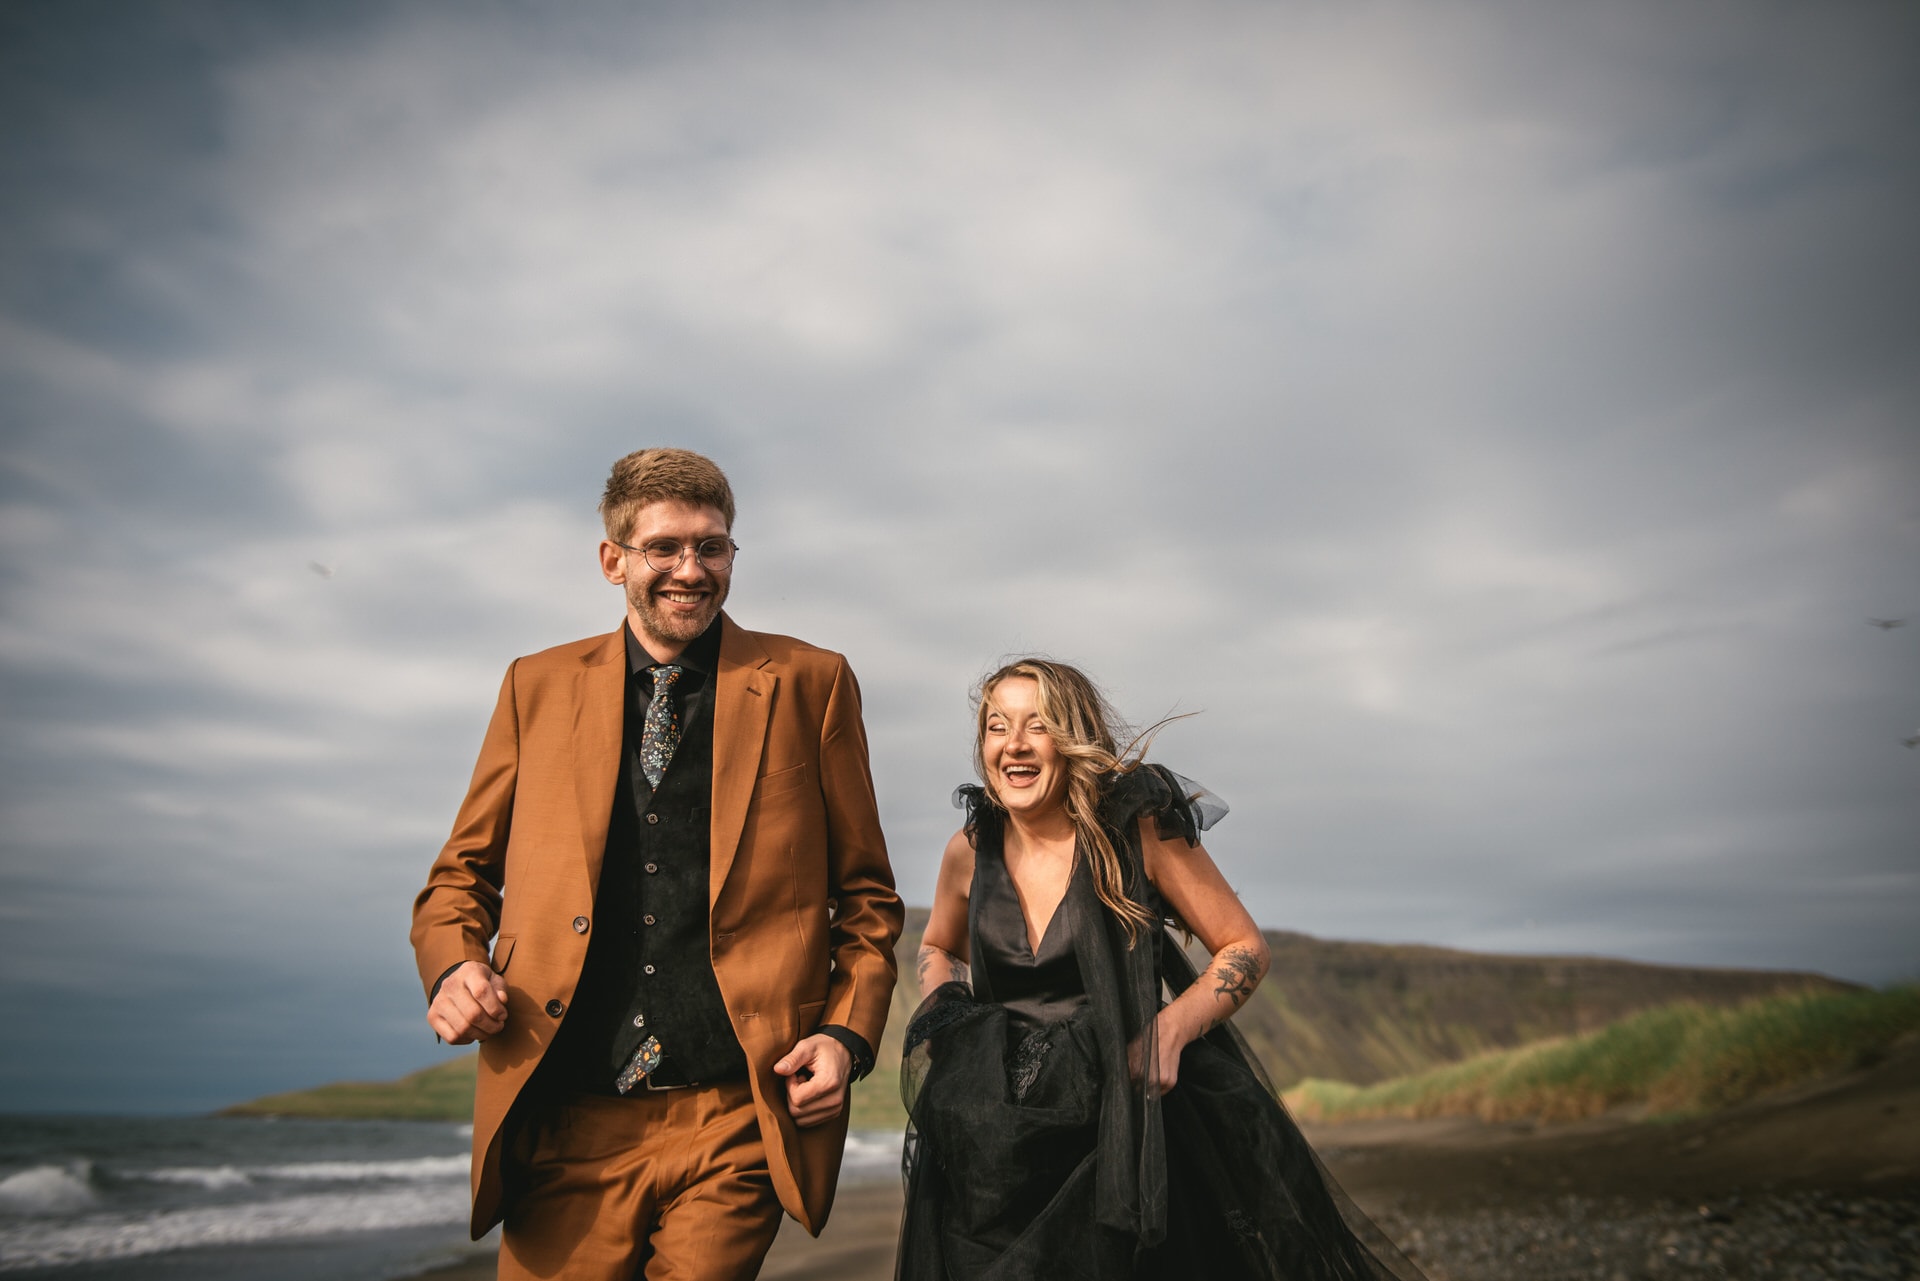 Warm embrace shared as the couple explores the untouched beauty of the Westfjords.